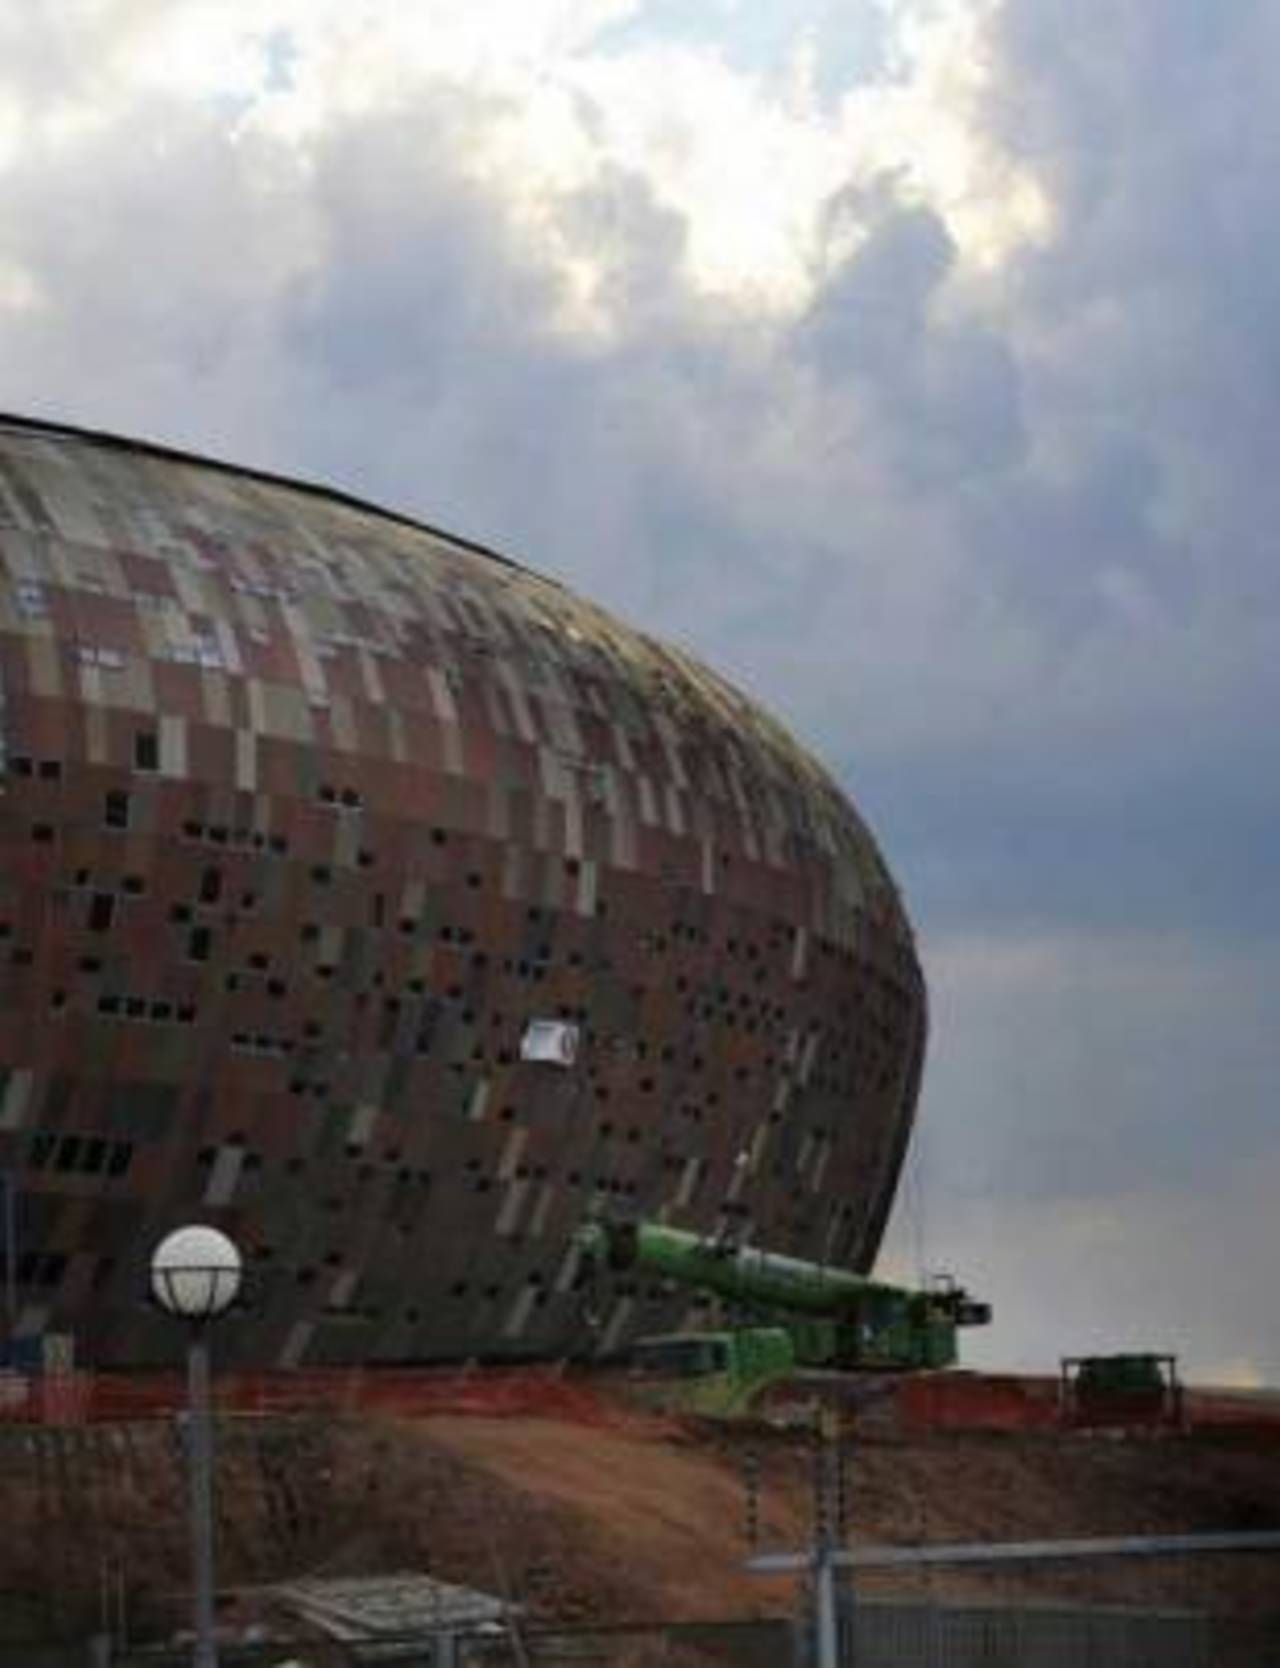 Part of the newly built FNB stadium, as seen from the  South African Football Association house in Johannesburg, South Africa, March 3, 2009